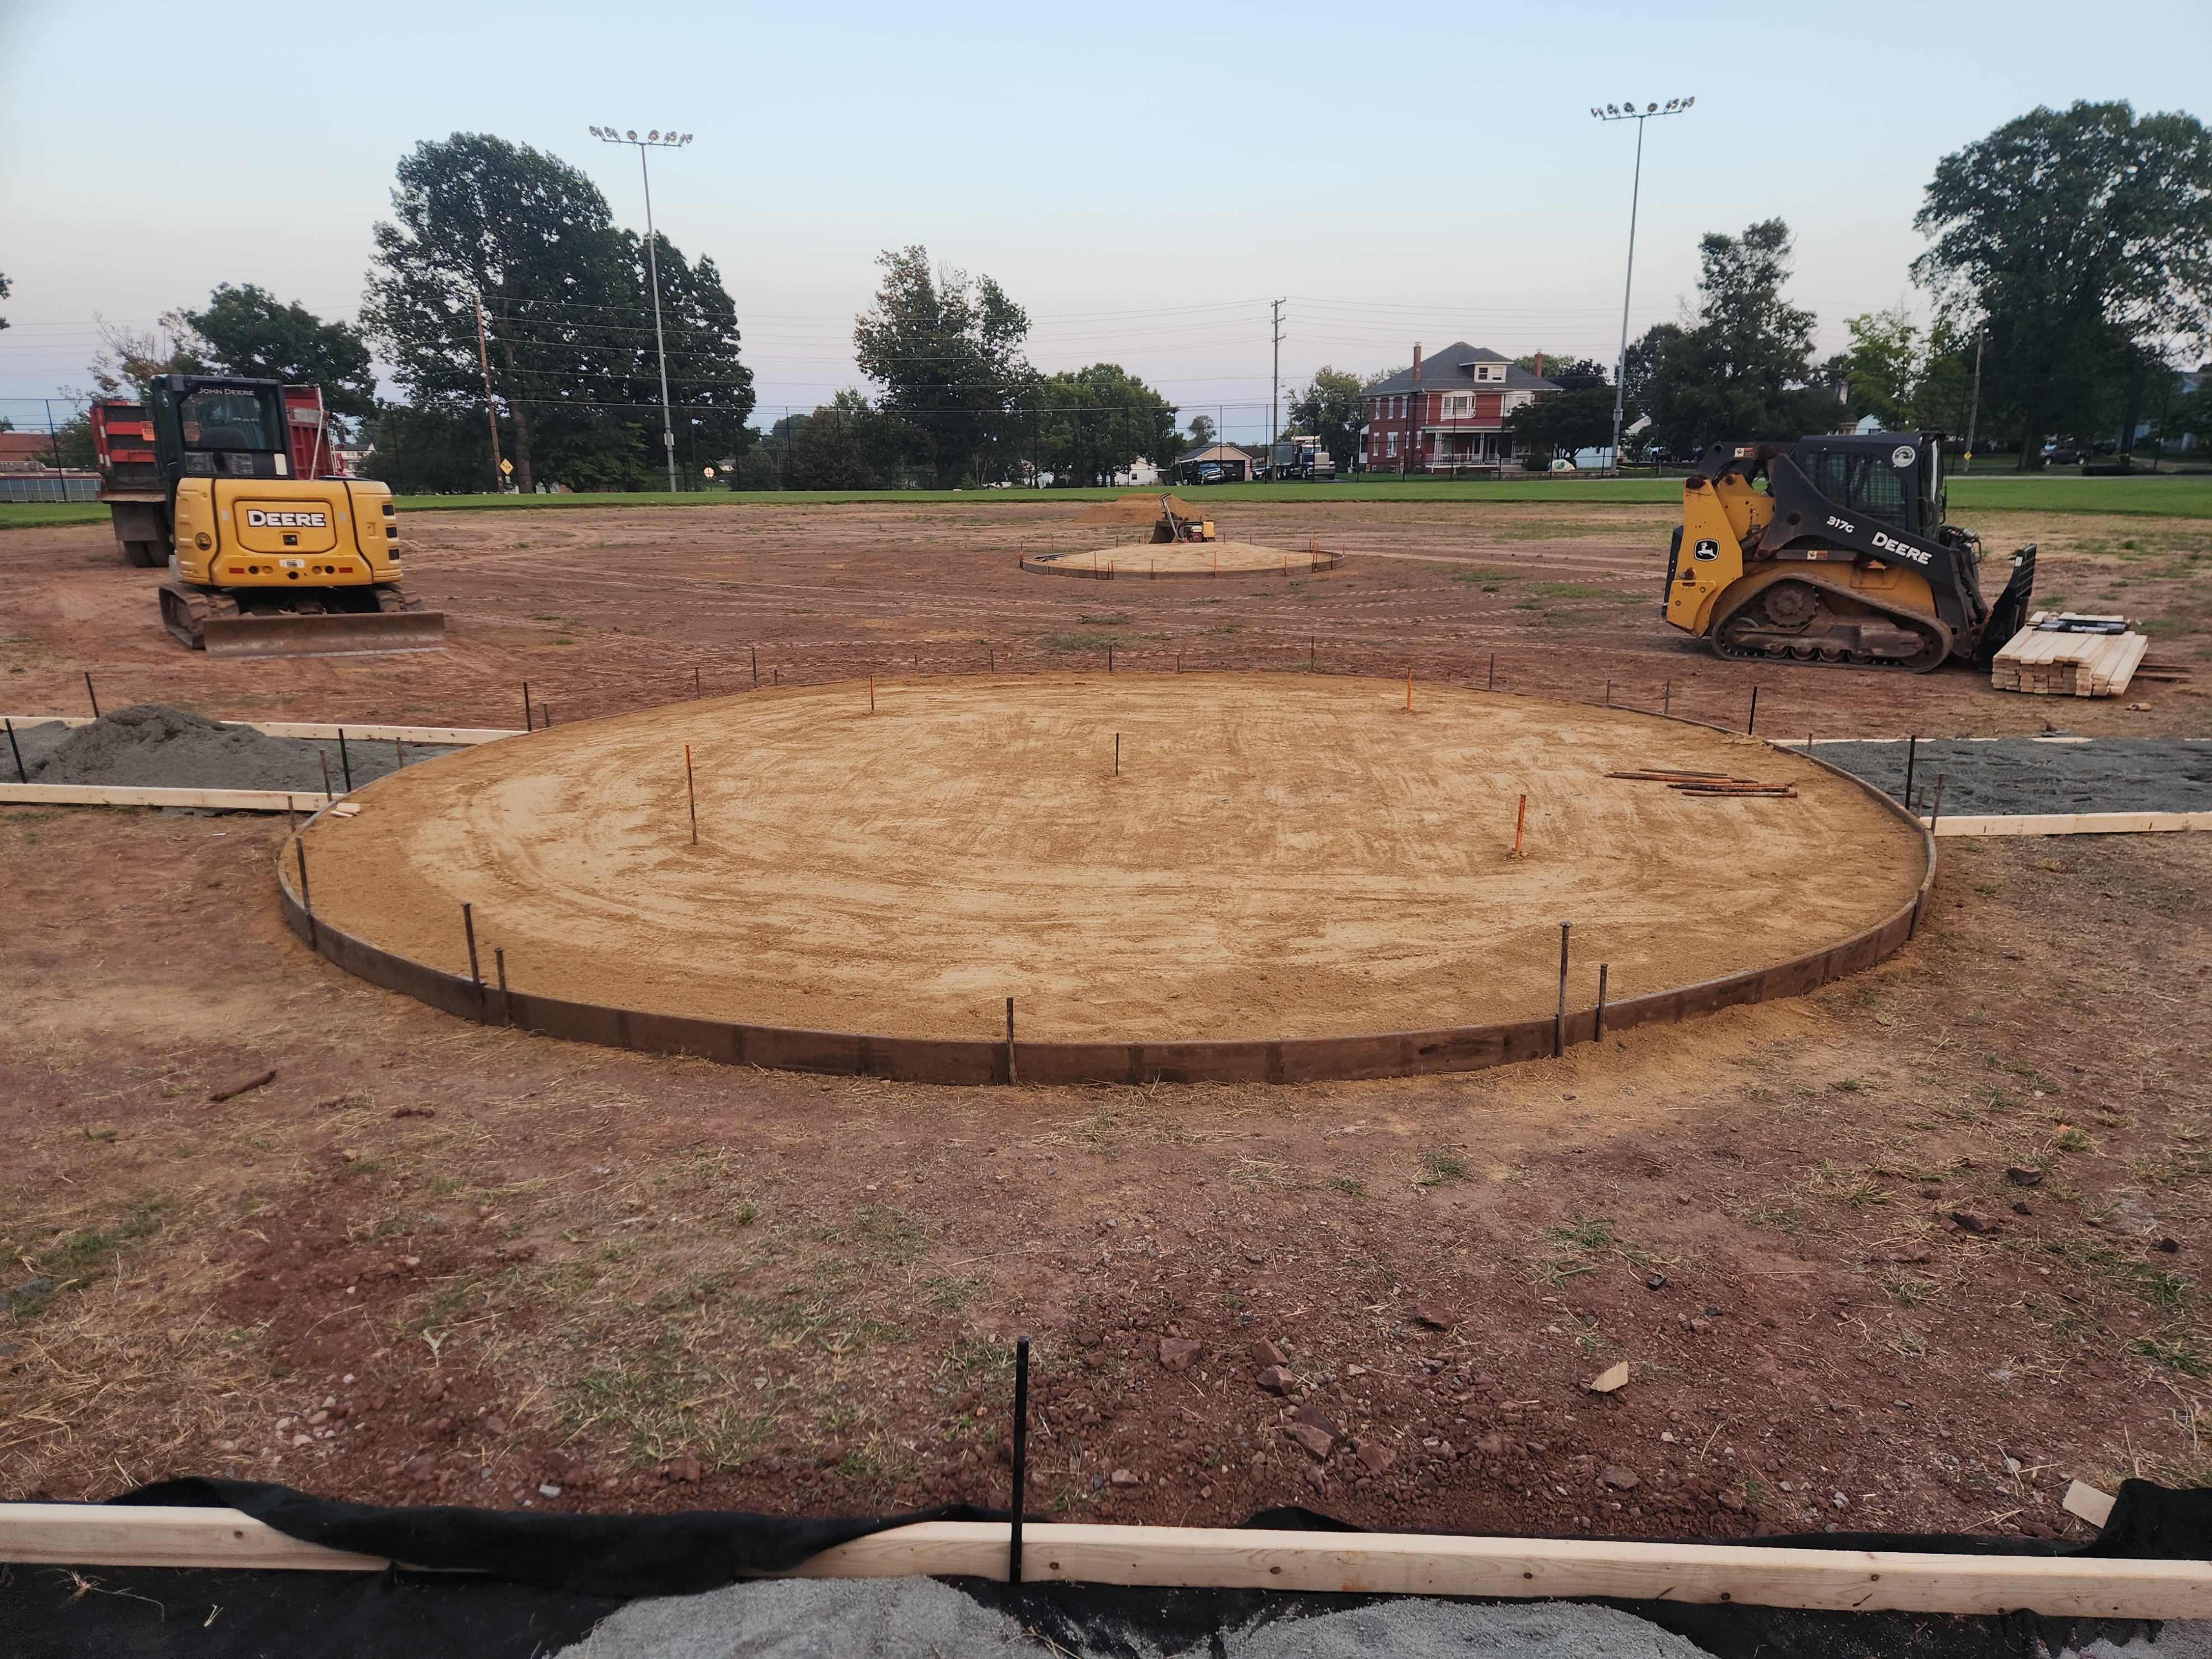 Home plate and mound